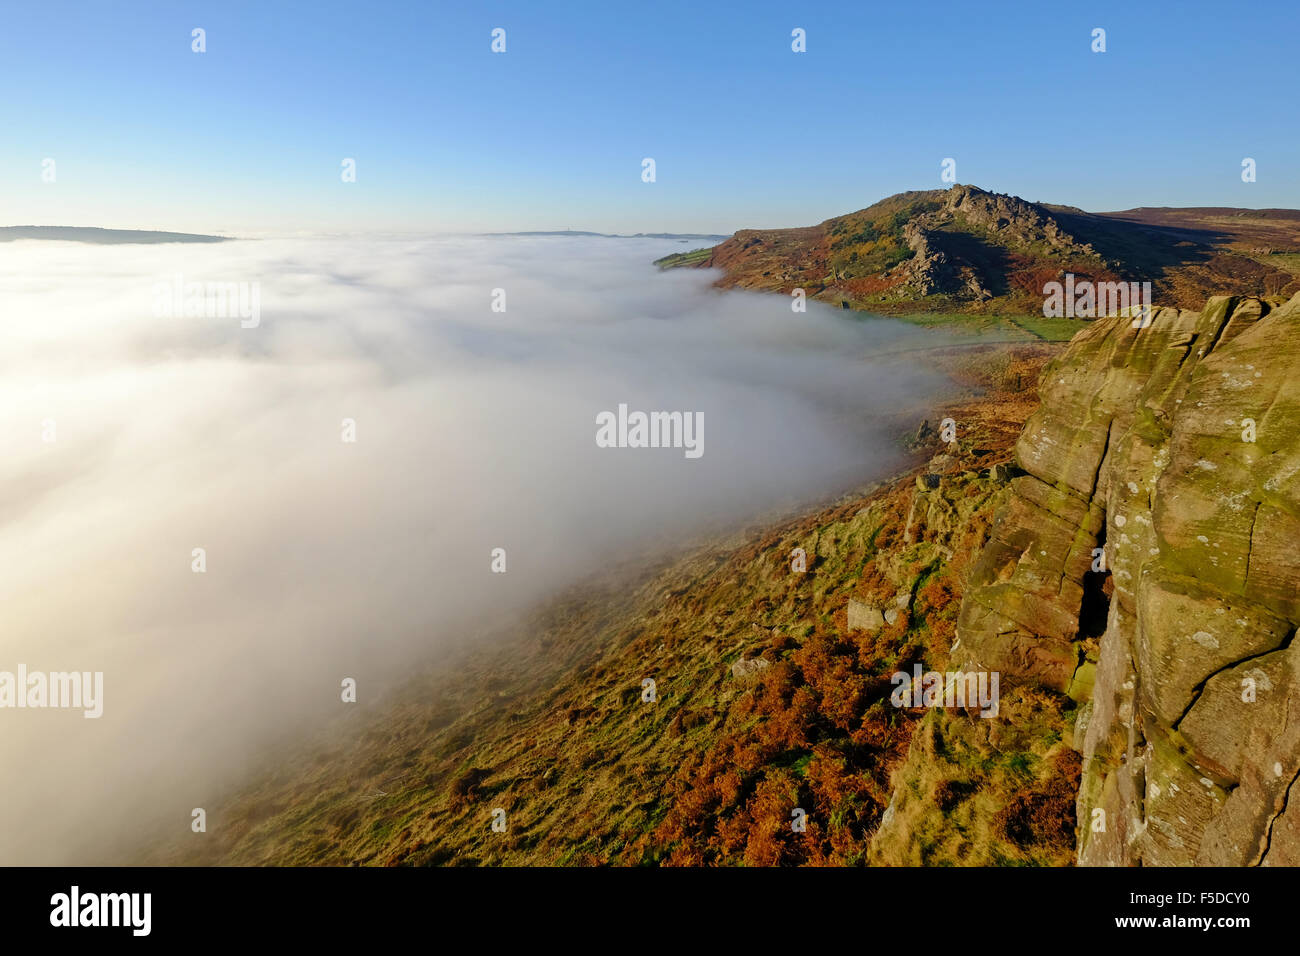 A temperature inversion at The Roaches, Staffordshire Moorlands, Peak District National Park. Stock Photo